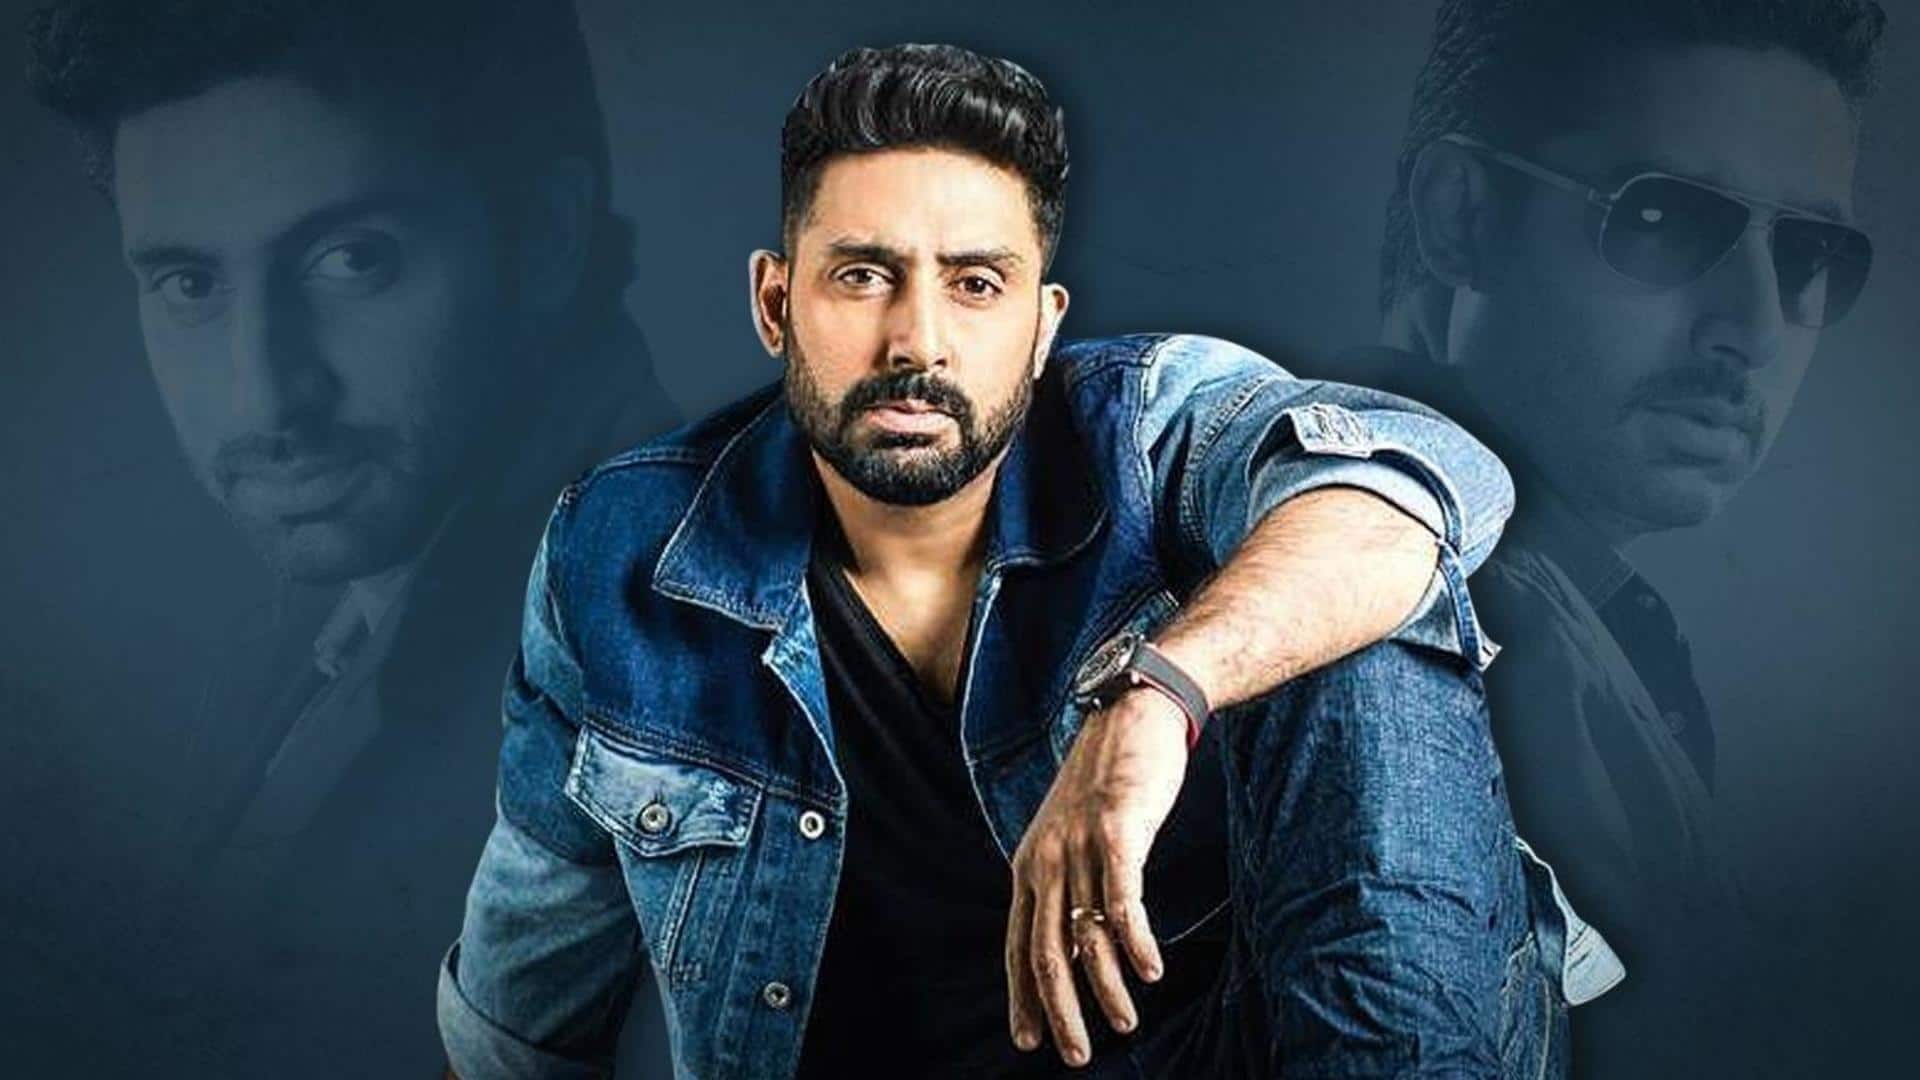 Abhishek Bachchan's birthday: Explore behind-the-scenes trivia from actor's films, childhood